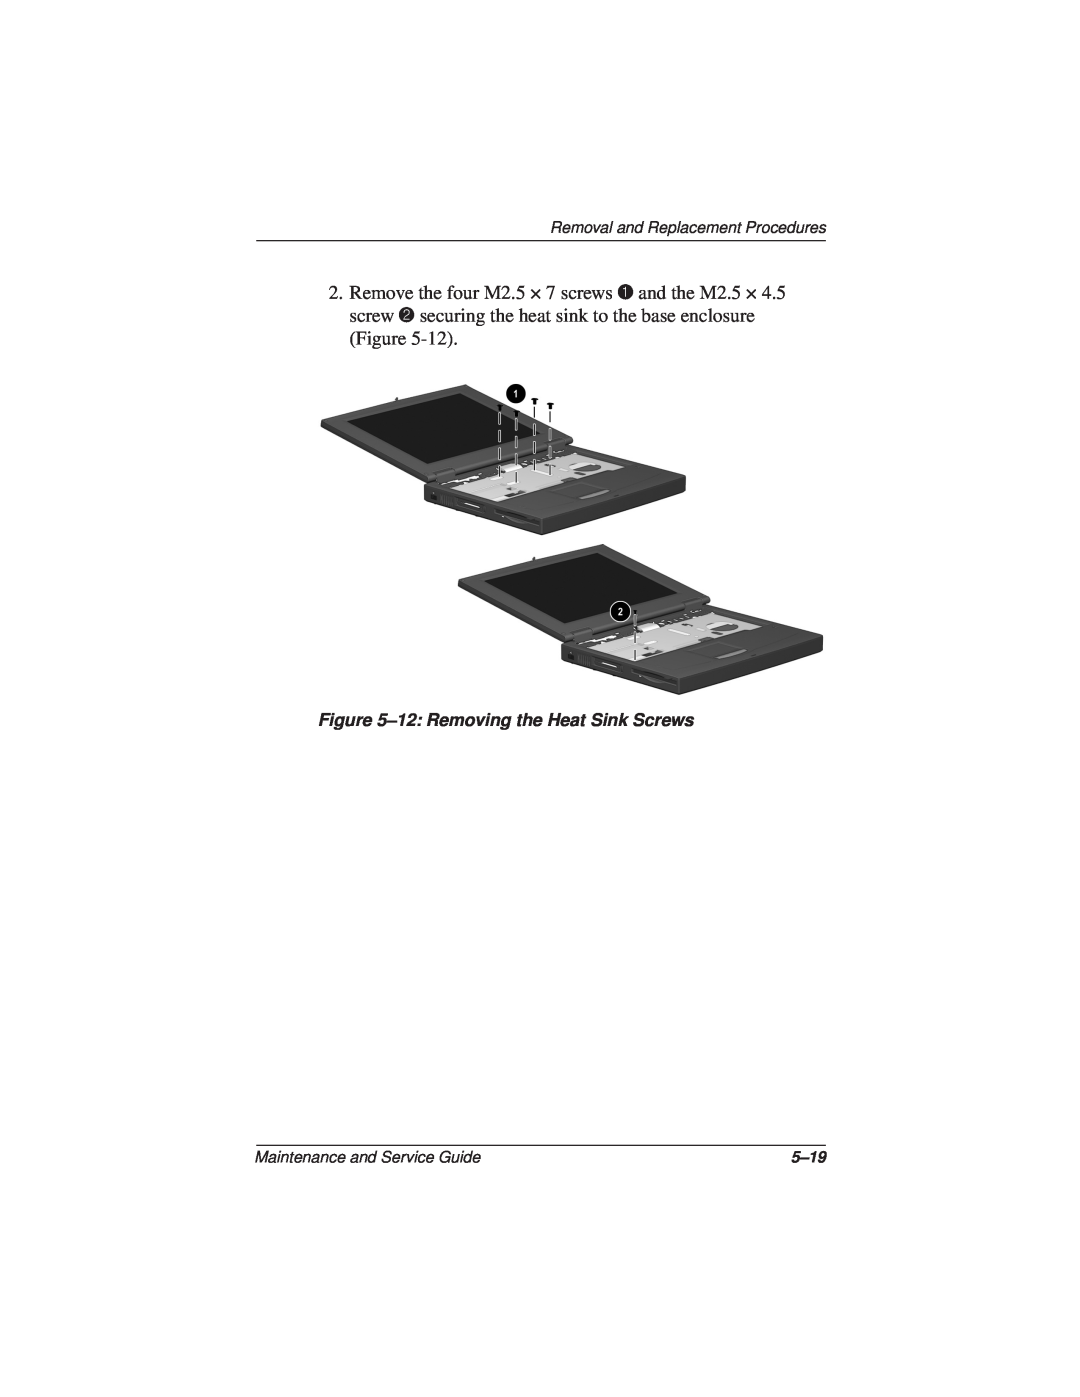 Compaq N110 12 Removing the Heat Sink Screws, Removal and Replacement Procedures, Maintenance and Service Guide, 5-19 